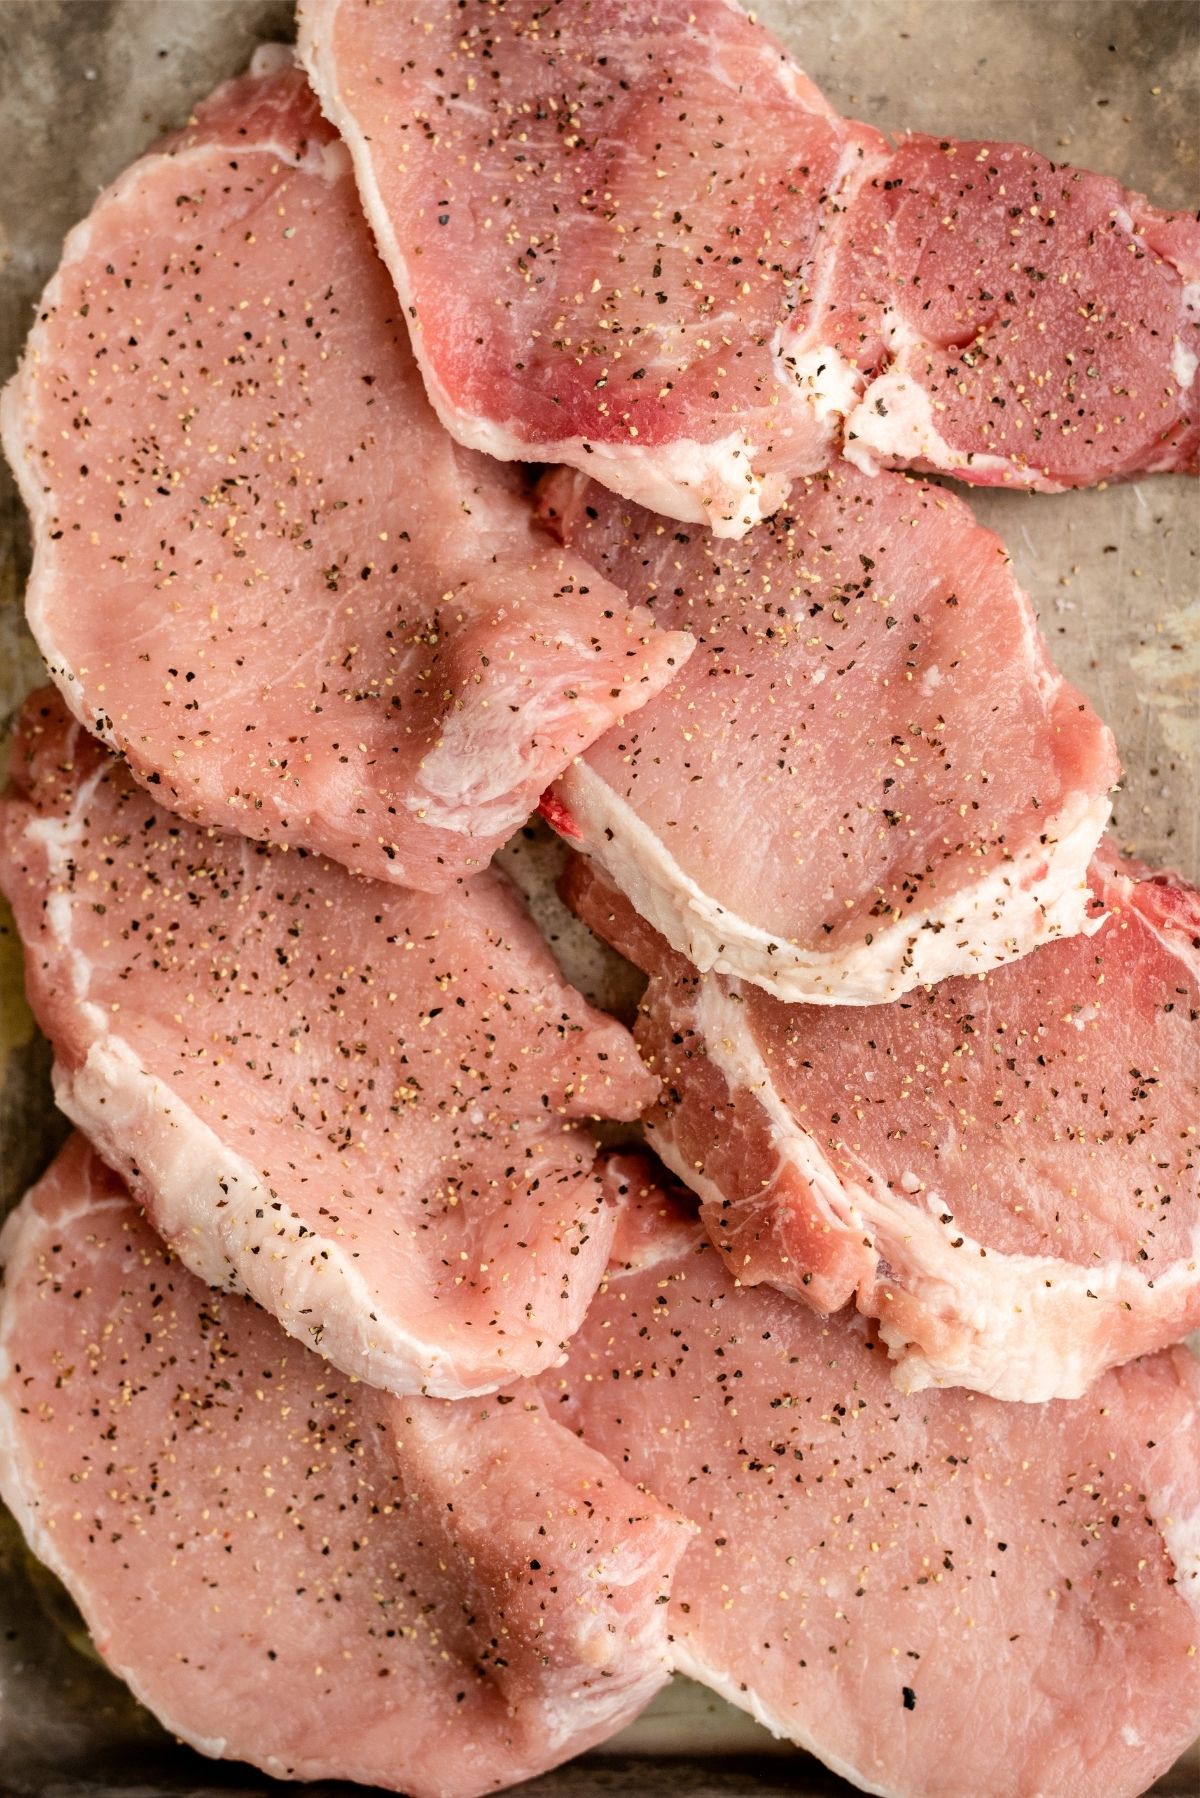 Raw pork chops with salt and pepper on them